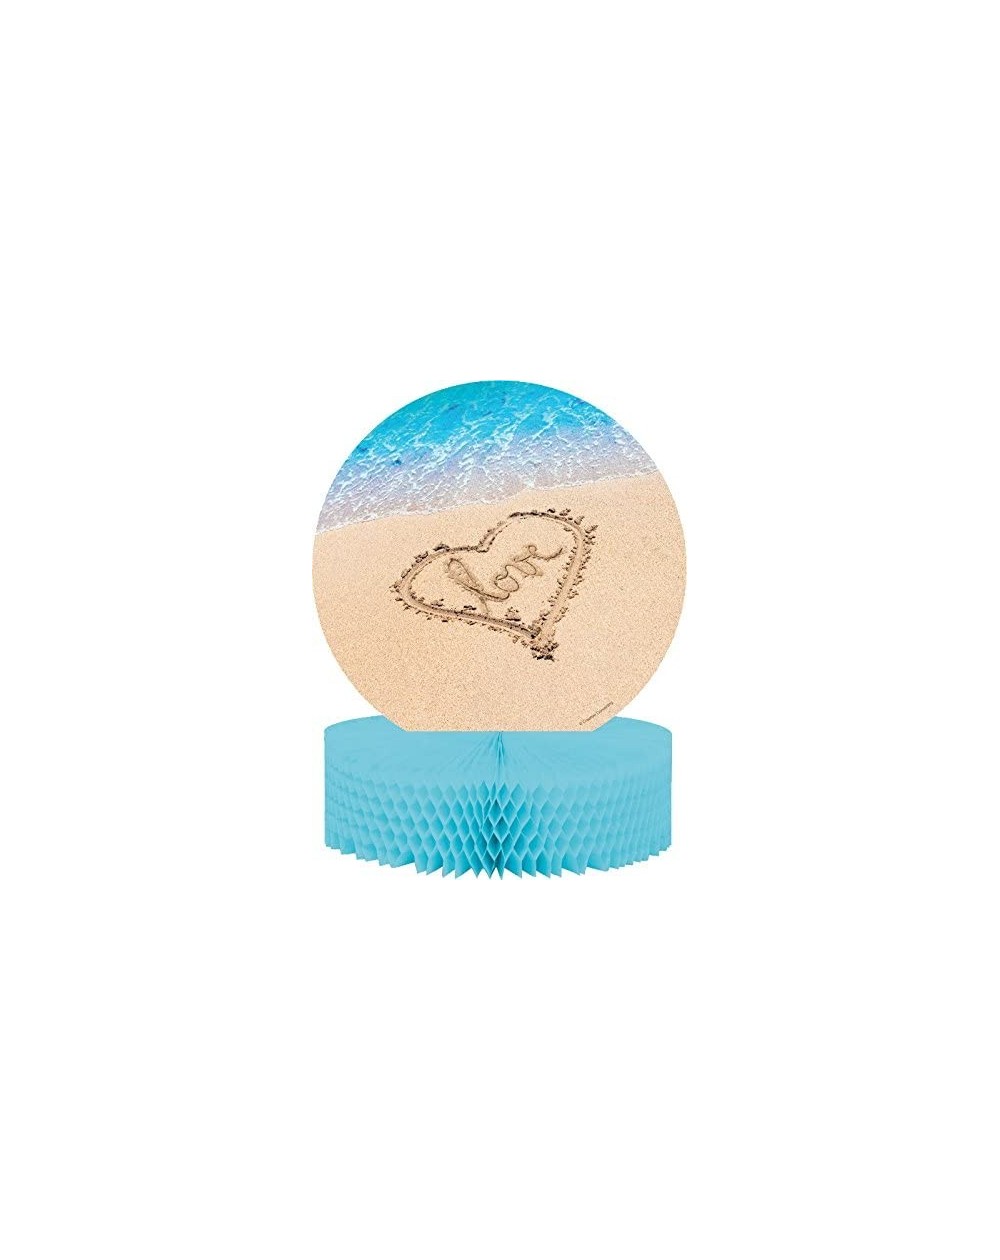 Centerpieces Beach Love Centerpiece with Honeycomb and Glitter- Blue/Brown - CU11J8GG4OF $18.26